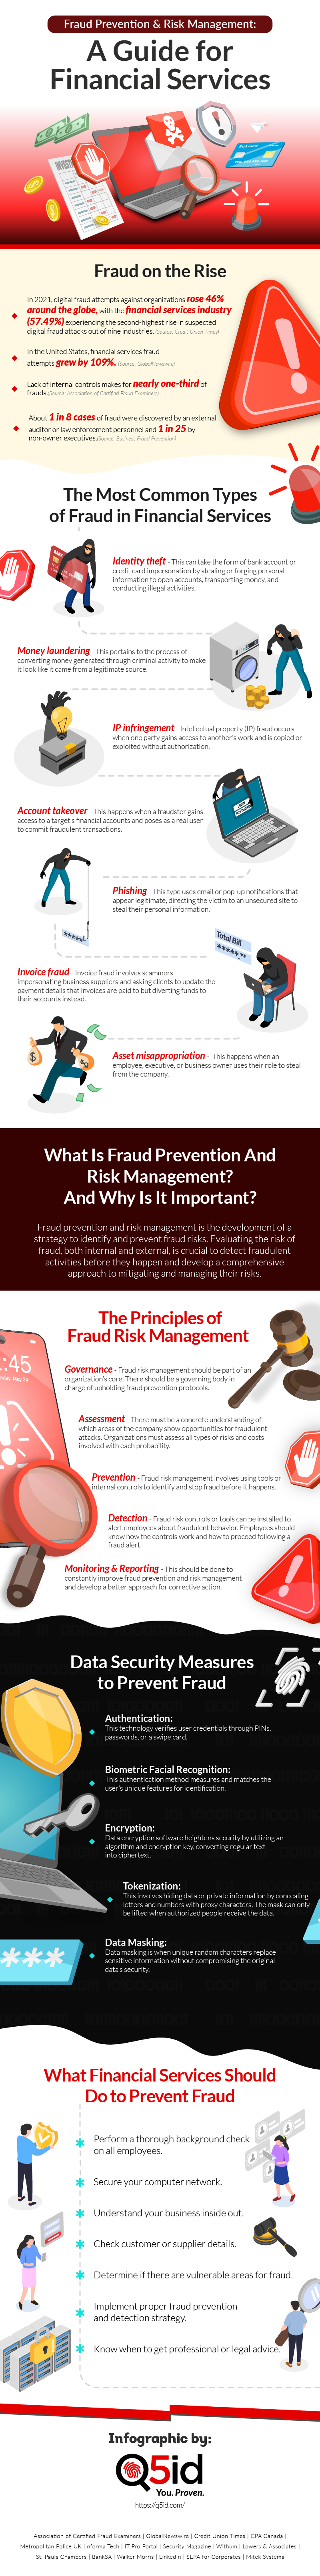 Infographic Fraud Prevention Risk Management A Guide For Financial Services